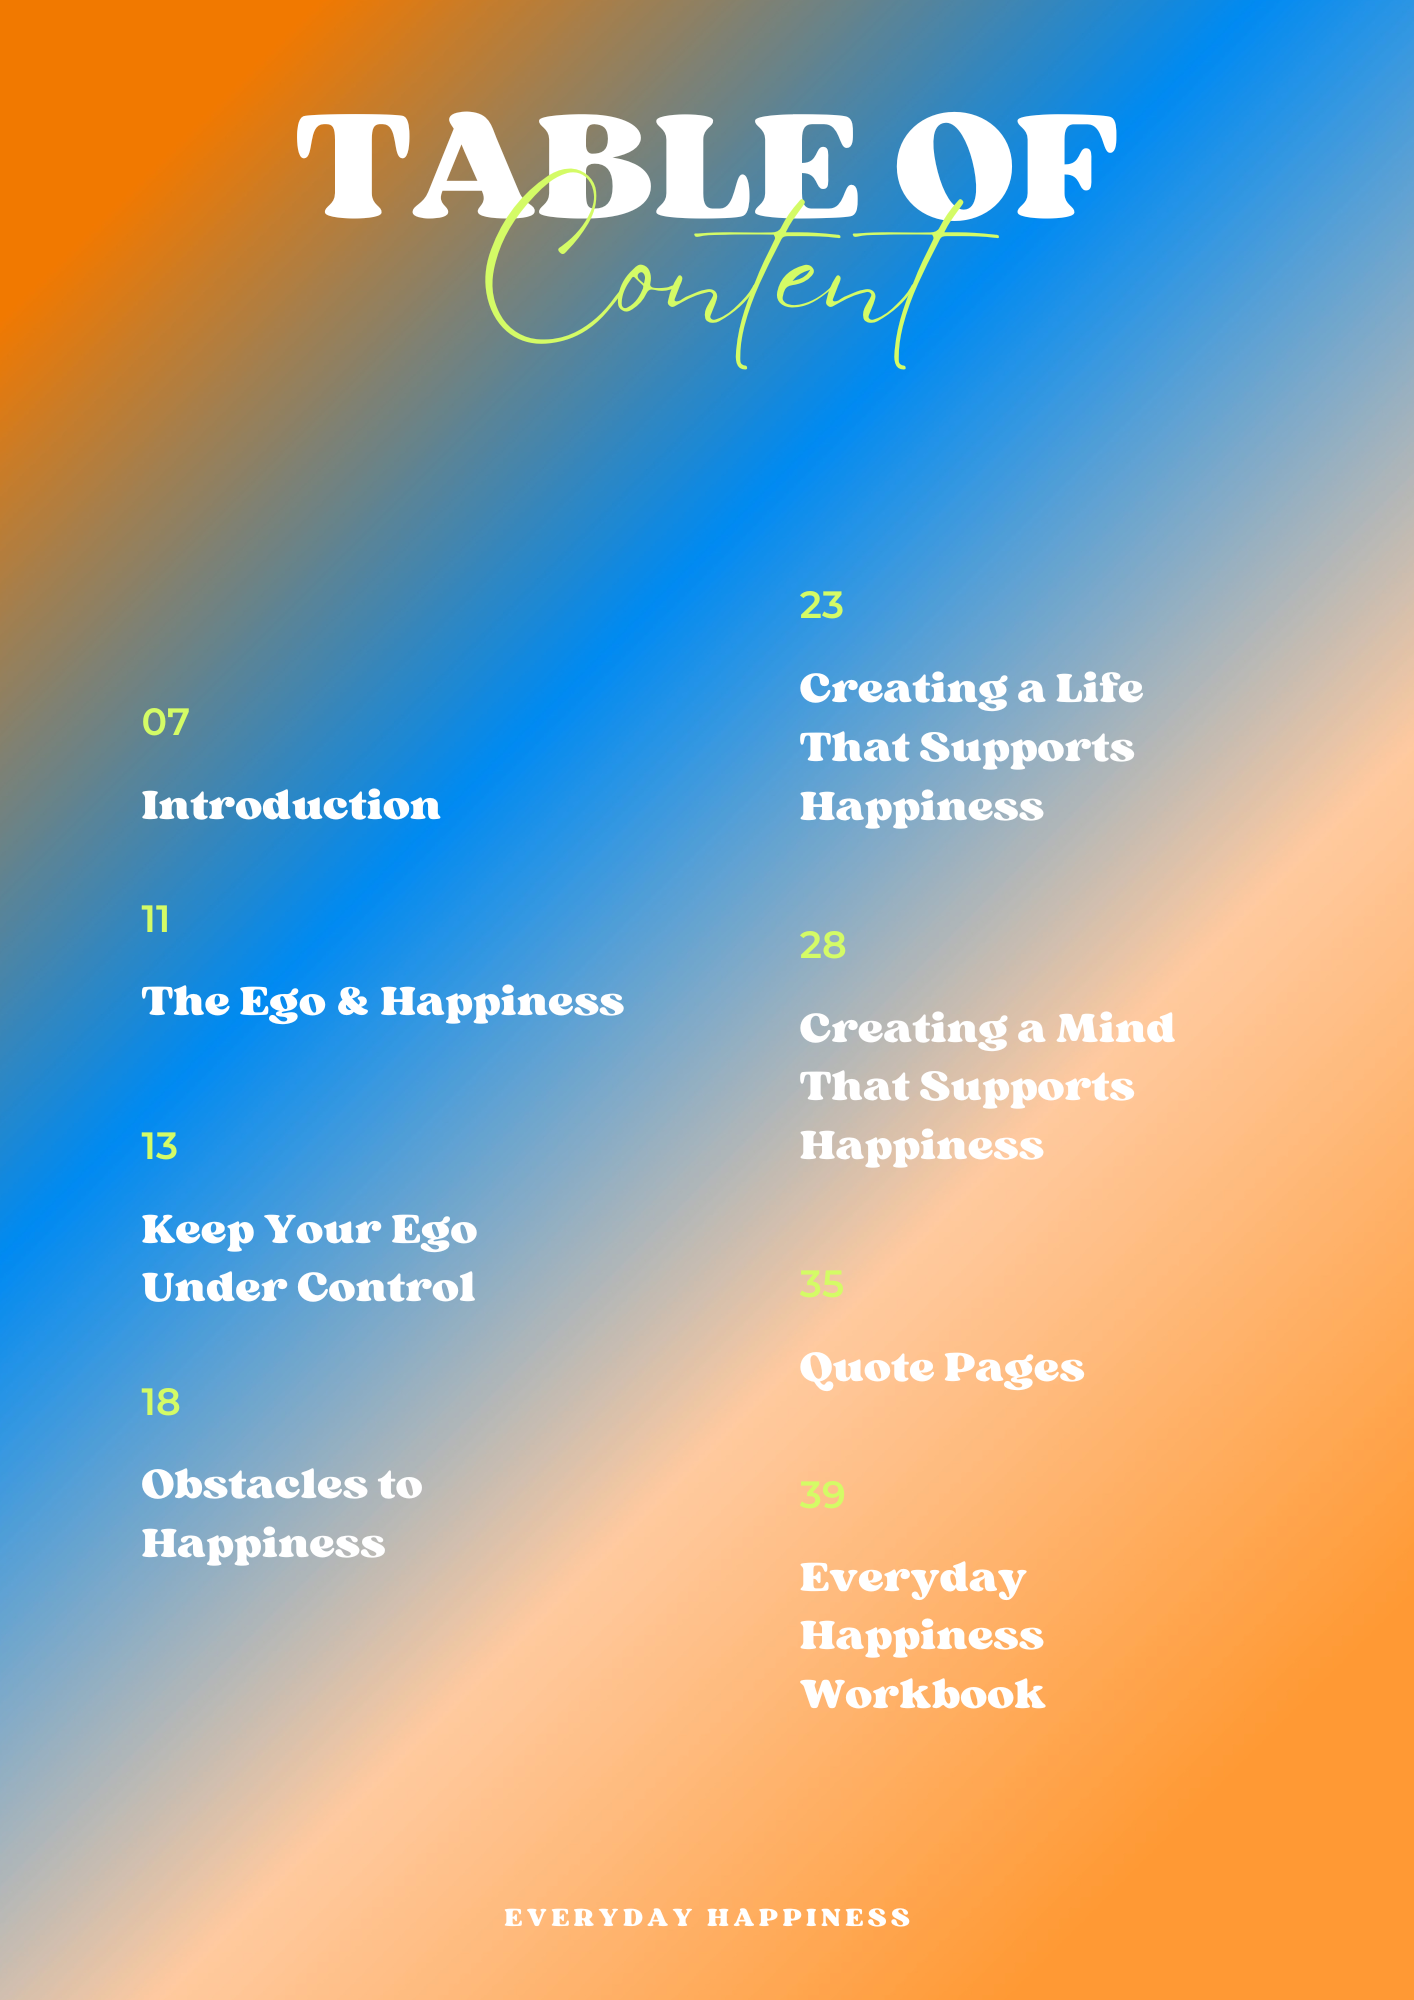 Everyday Happiness: Unlock the Happiness You Deserve